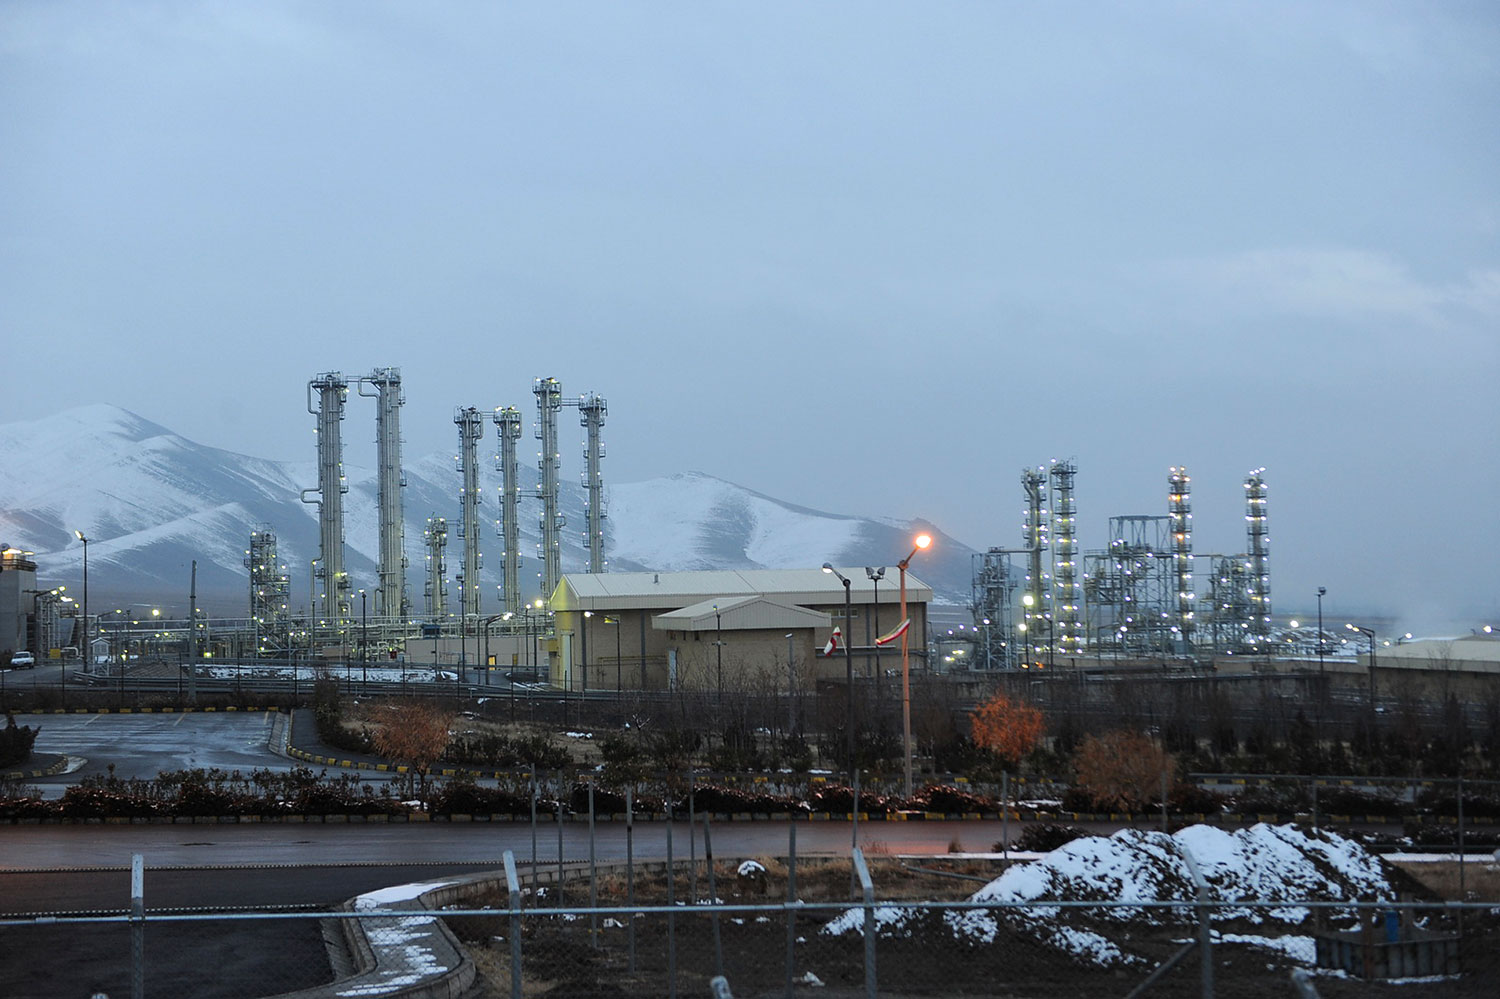 A view of Iran's heavy water nuclear facilities is seen, near the central city of Arak, in 2011. (Hamid Foroutan / ISNA / AP)